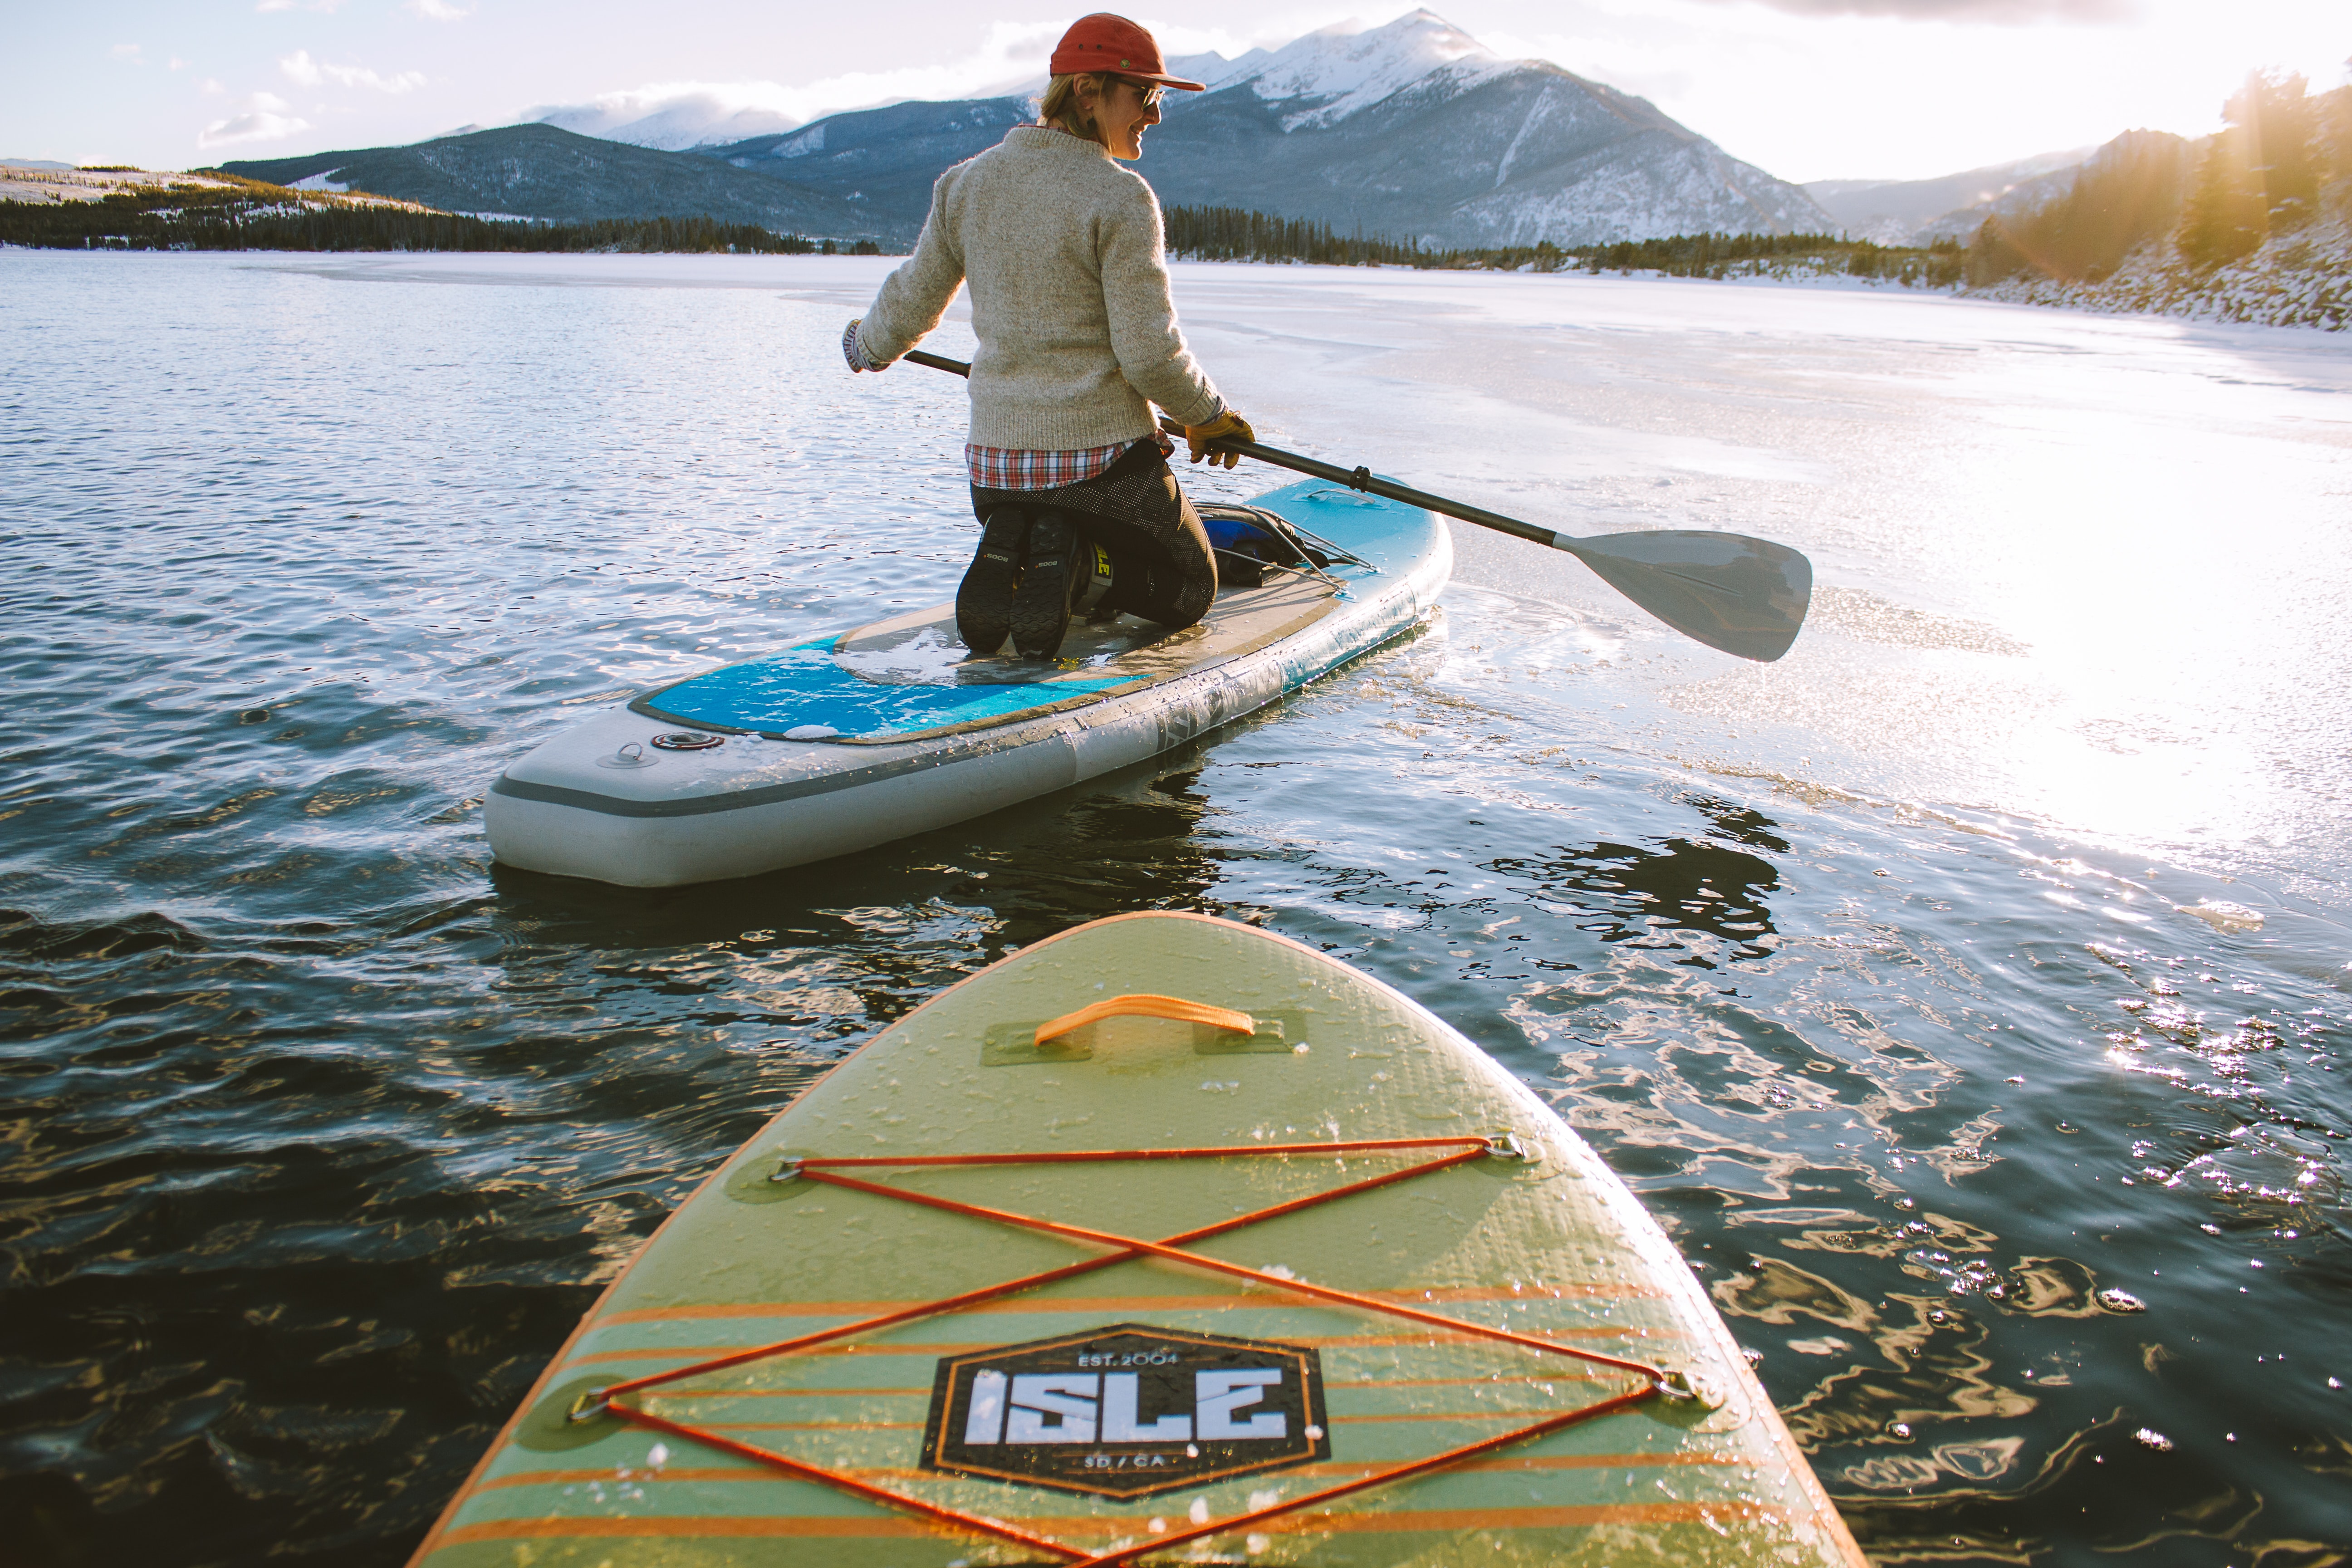 paddleboarding in the mountains at sunrise on a cold day